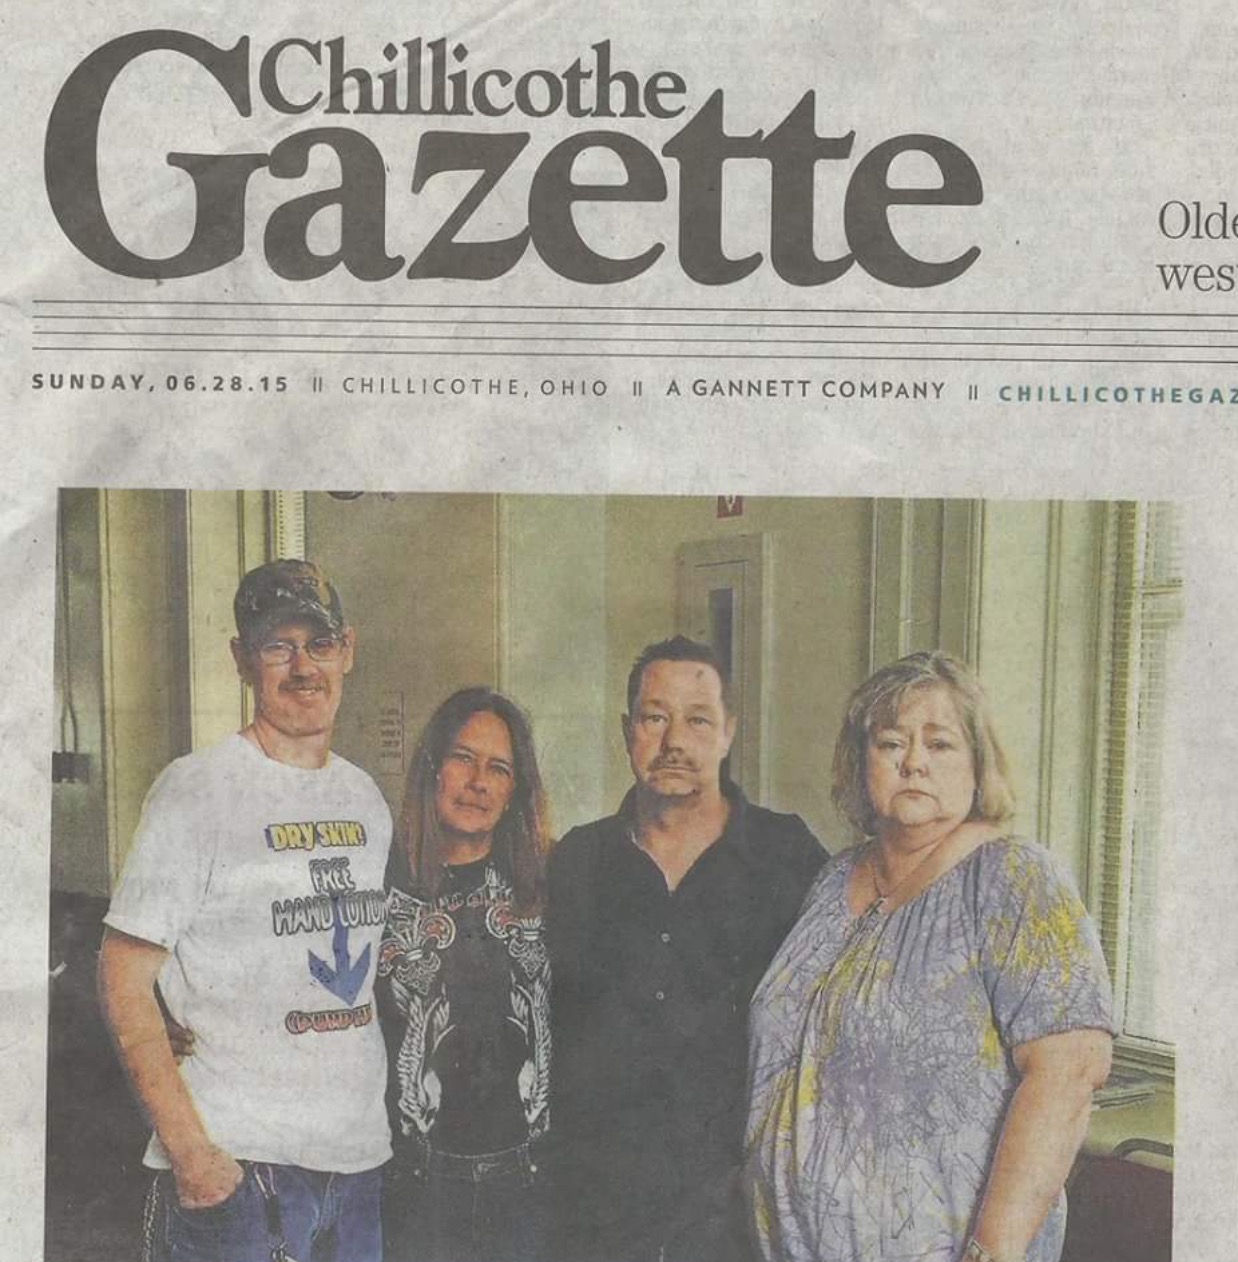 Funny tshirt that got on the front page of the local paper